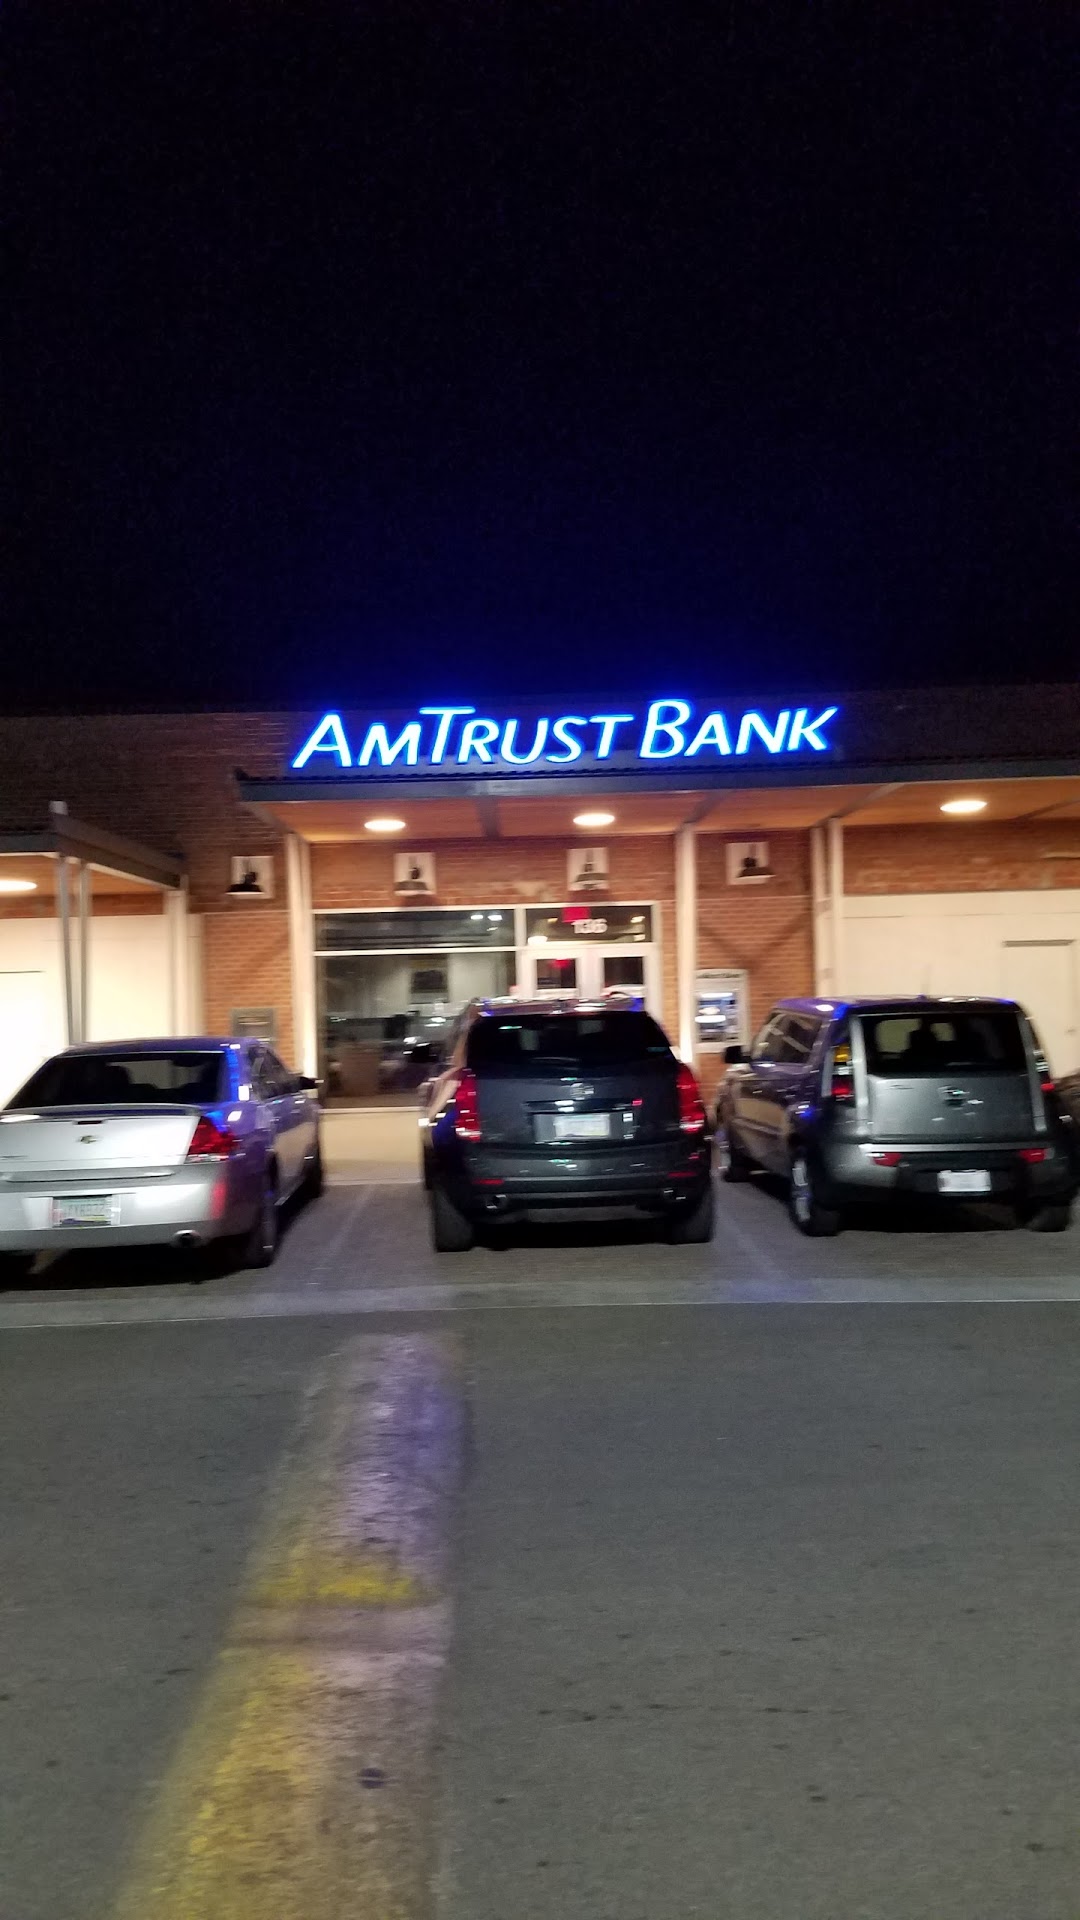 AmTrust Bank, a division of New York Community Bank